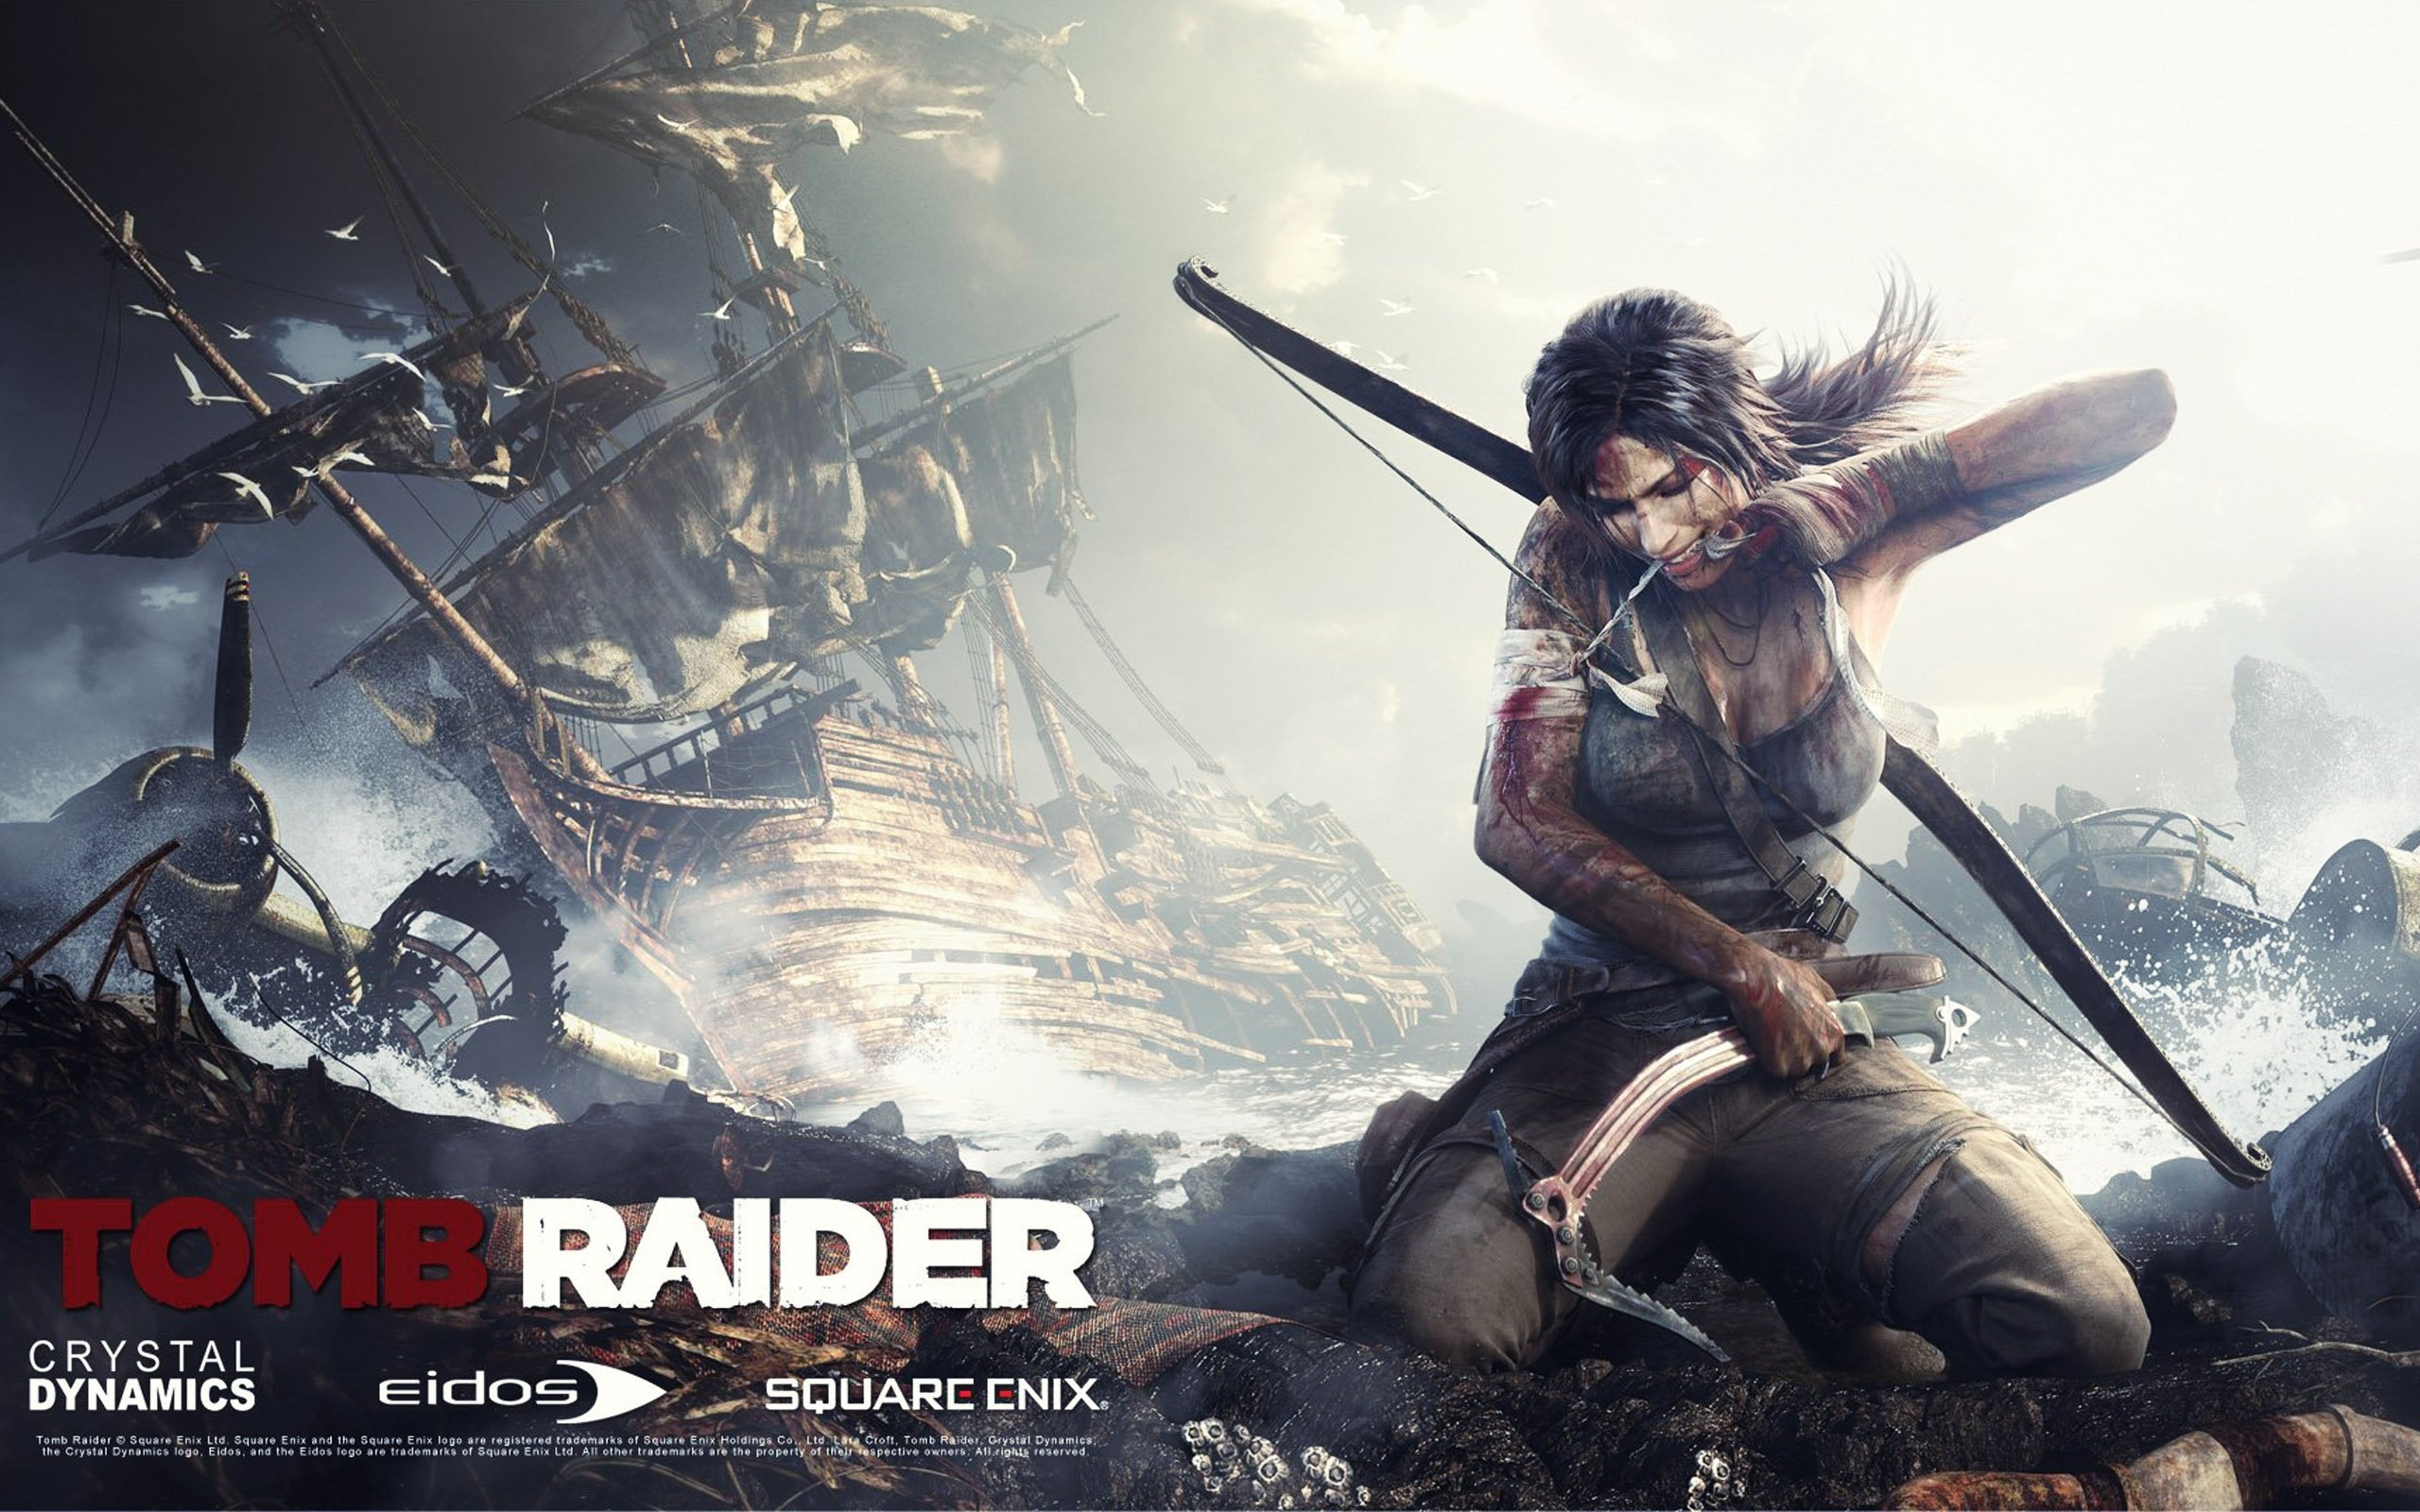 Tomb Raider Weapons Unlocked for 2560 x 1600 widescreen resolution